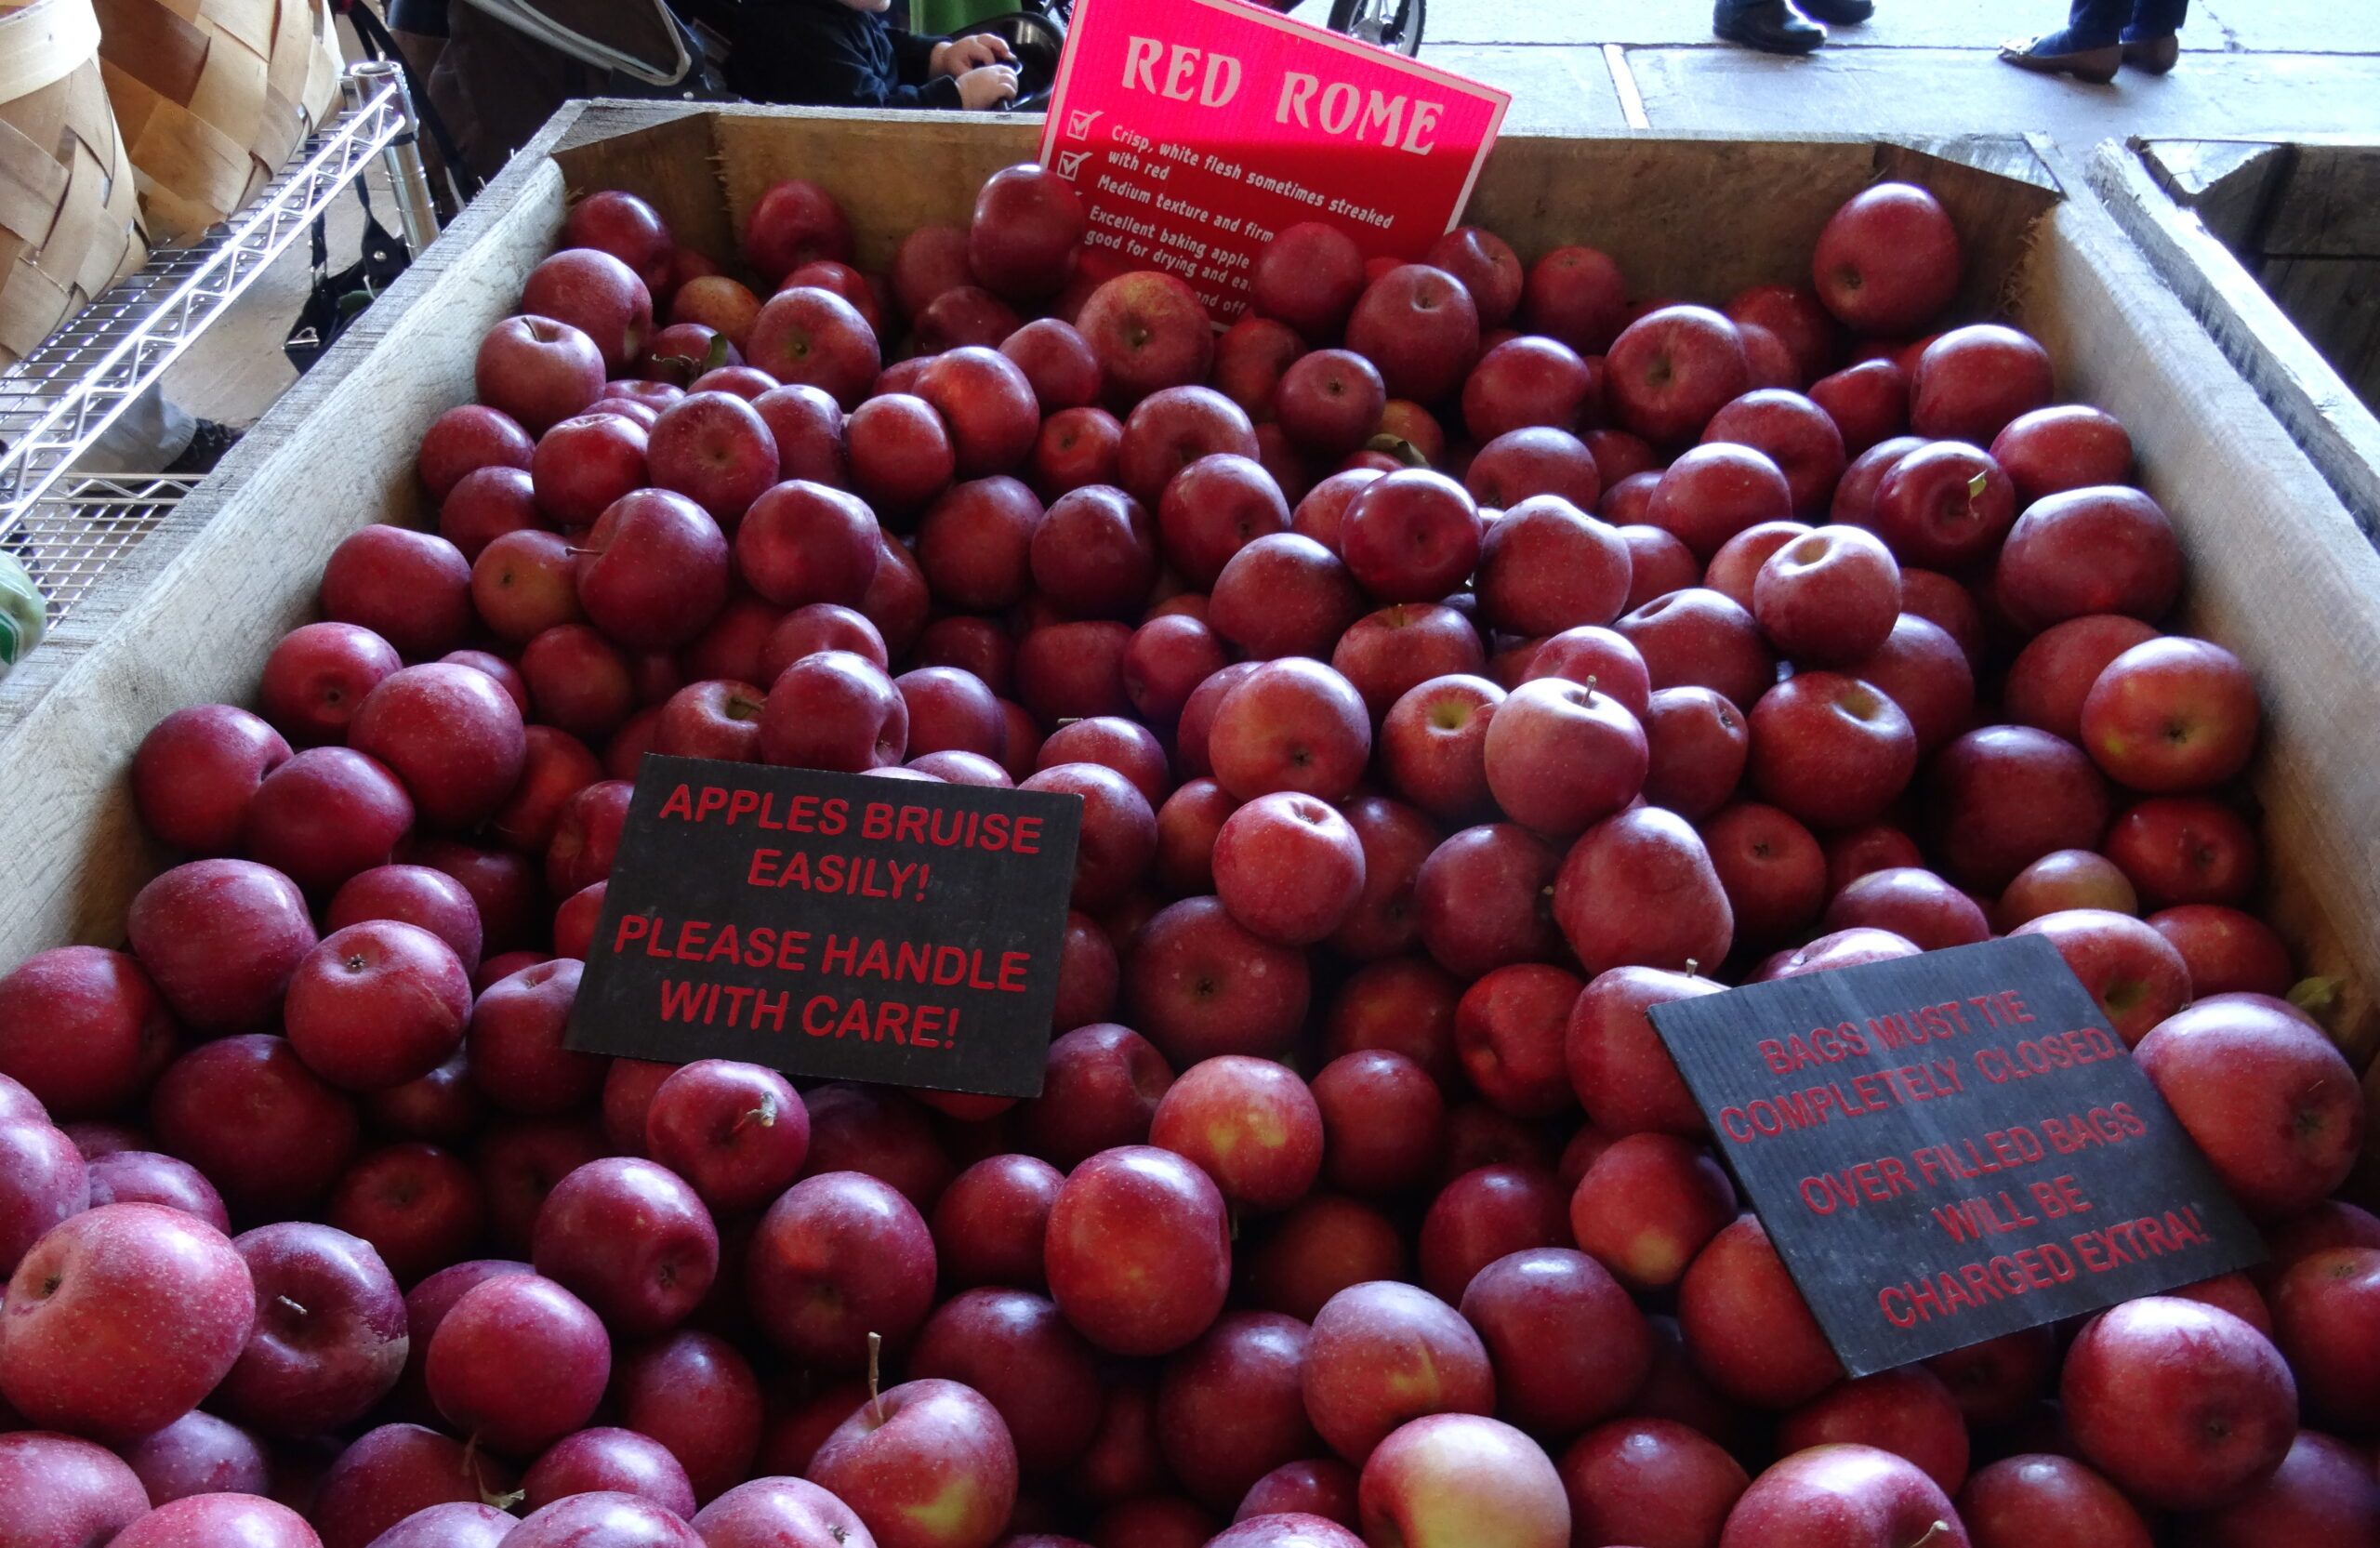 A big bin of apples including Rome, cameo, pink lady and red delicious